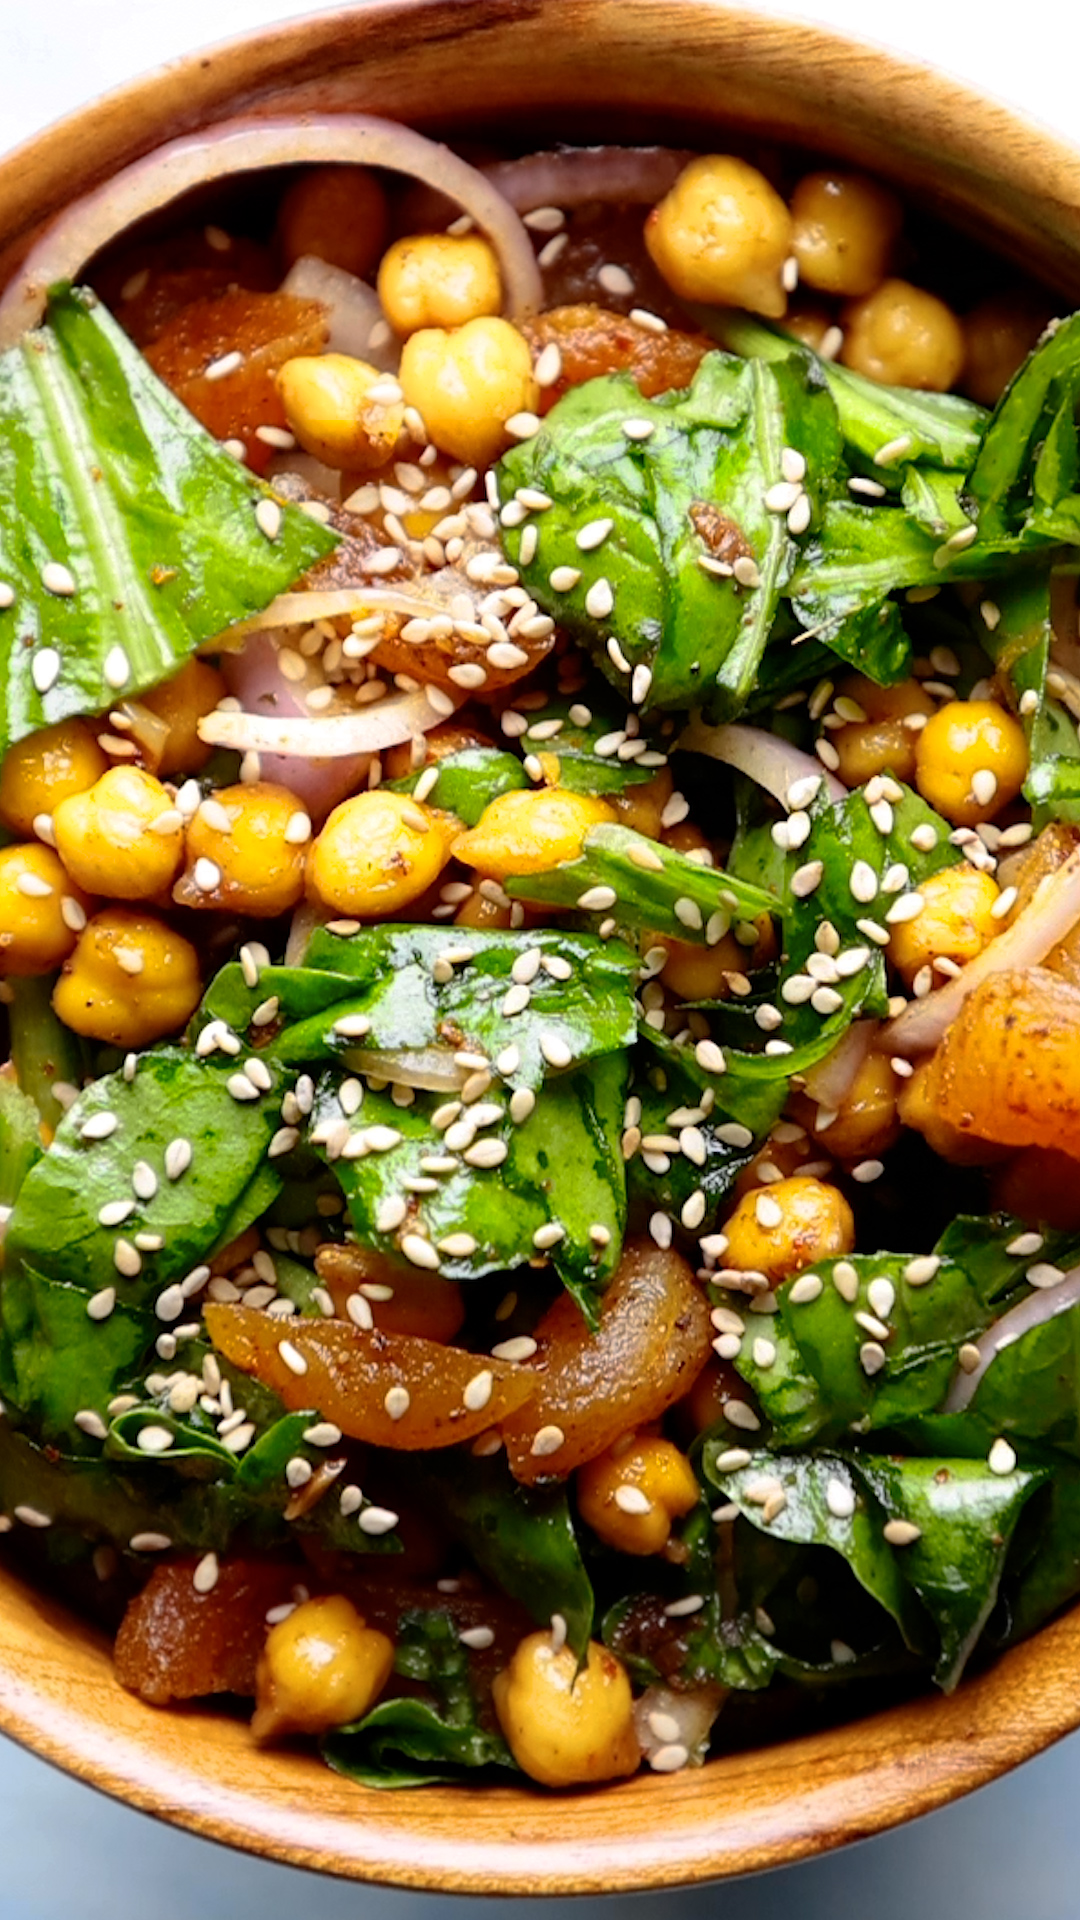 Spiced Spinach And Chickpea Salad With Apricot And Onions